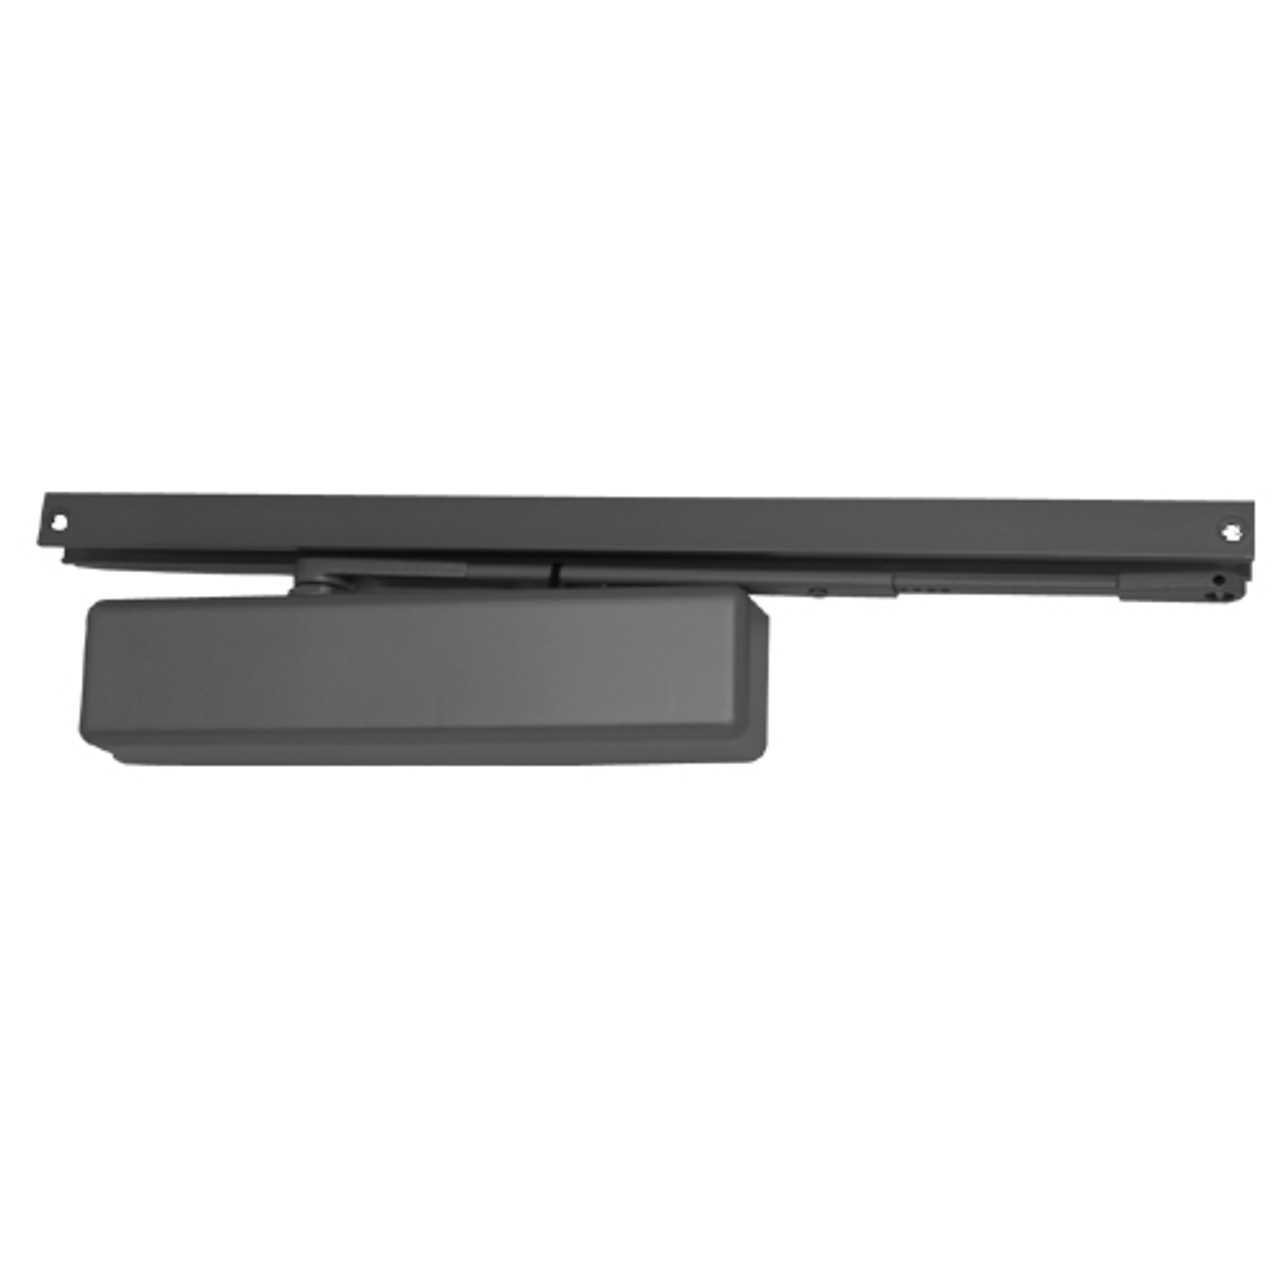 1460T-H-BLACK-DS LCN Surface Mount Door Closer with Hold Open Arm in Black Finish